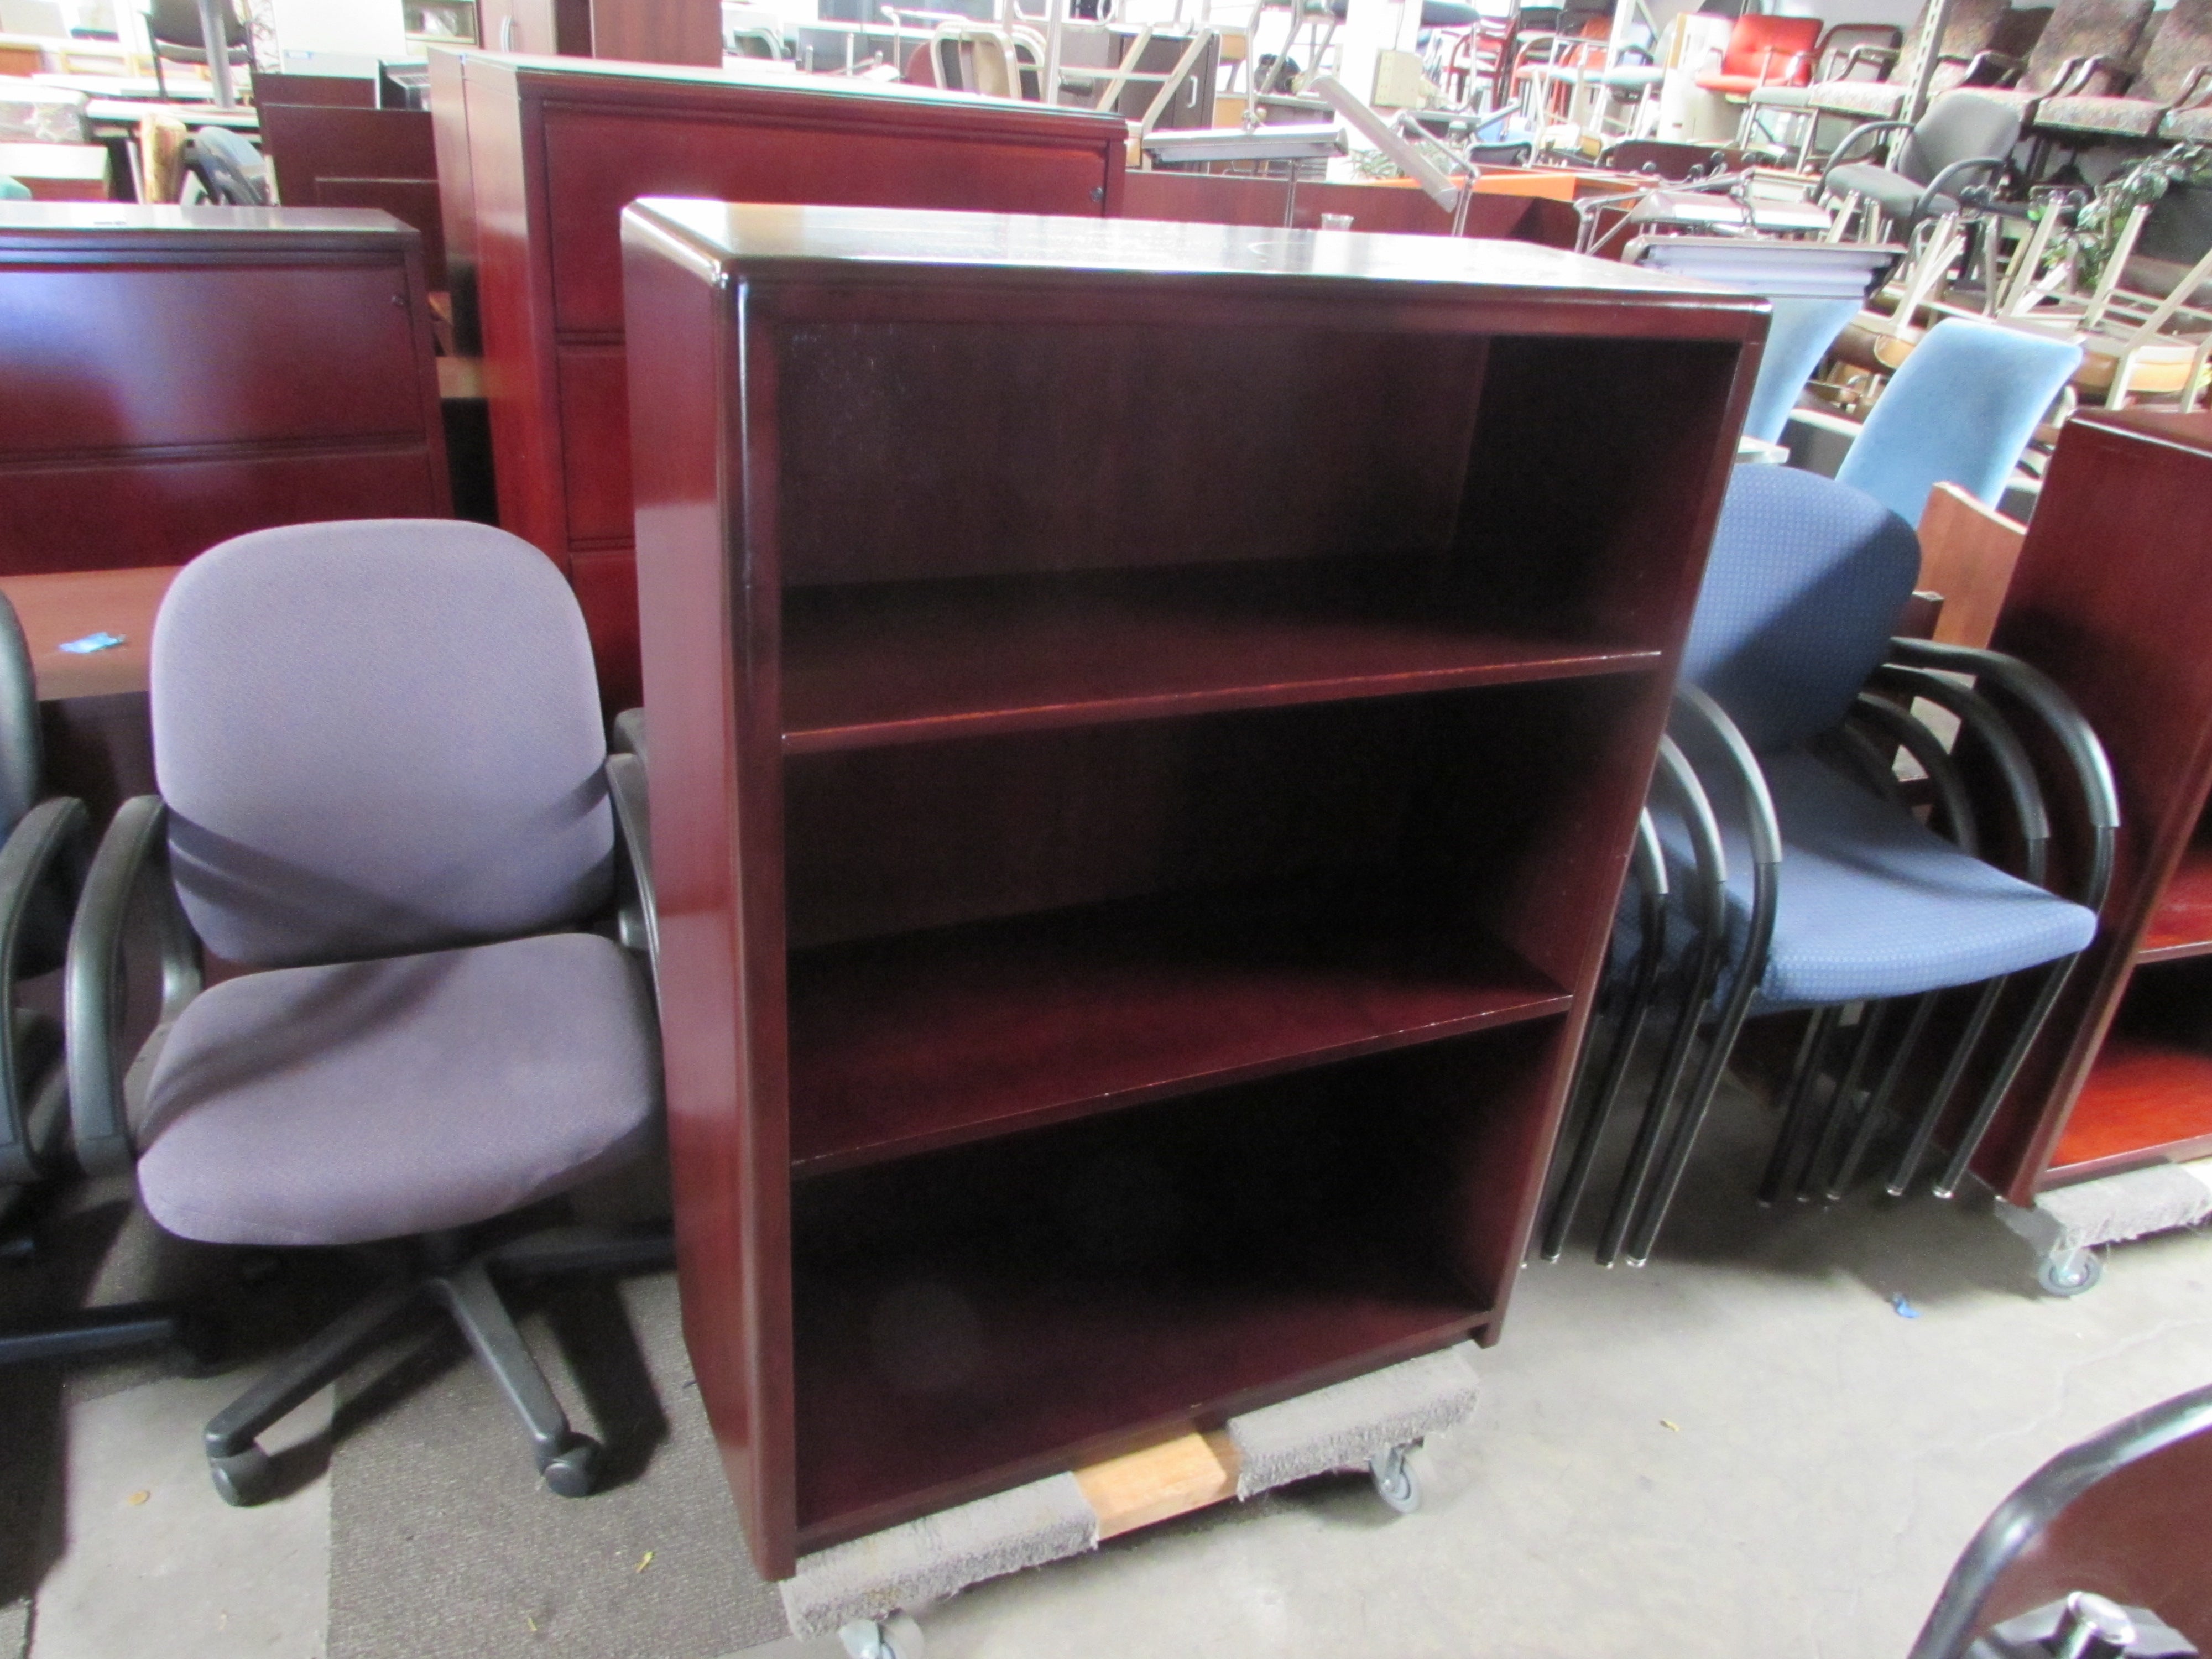 4 Foot Tall Mahogany Wood Bookcase Recycled Office Furnishings